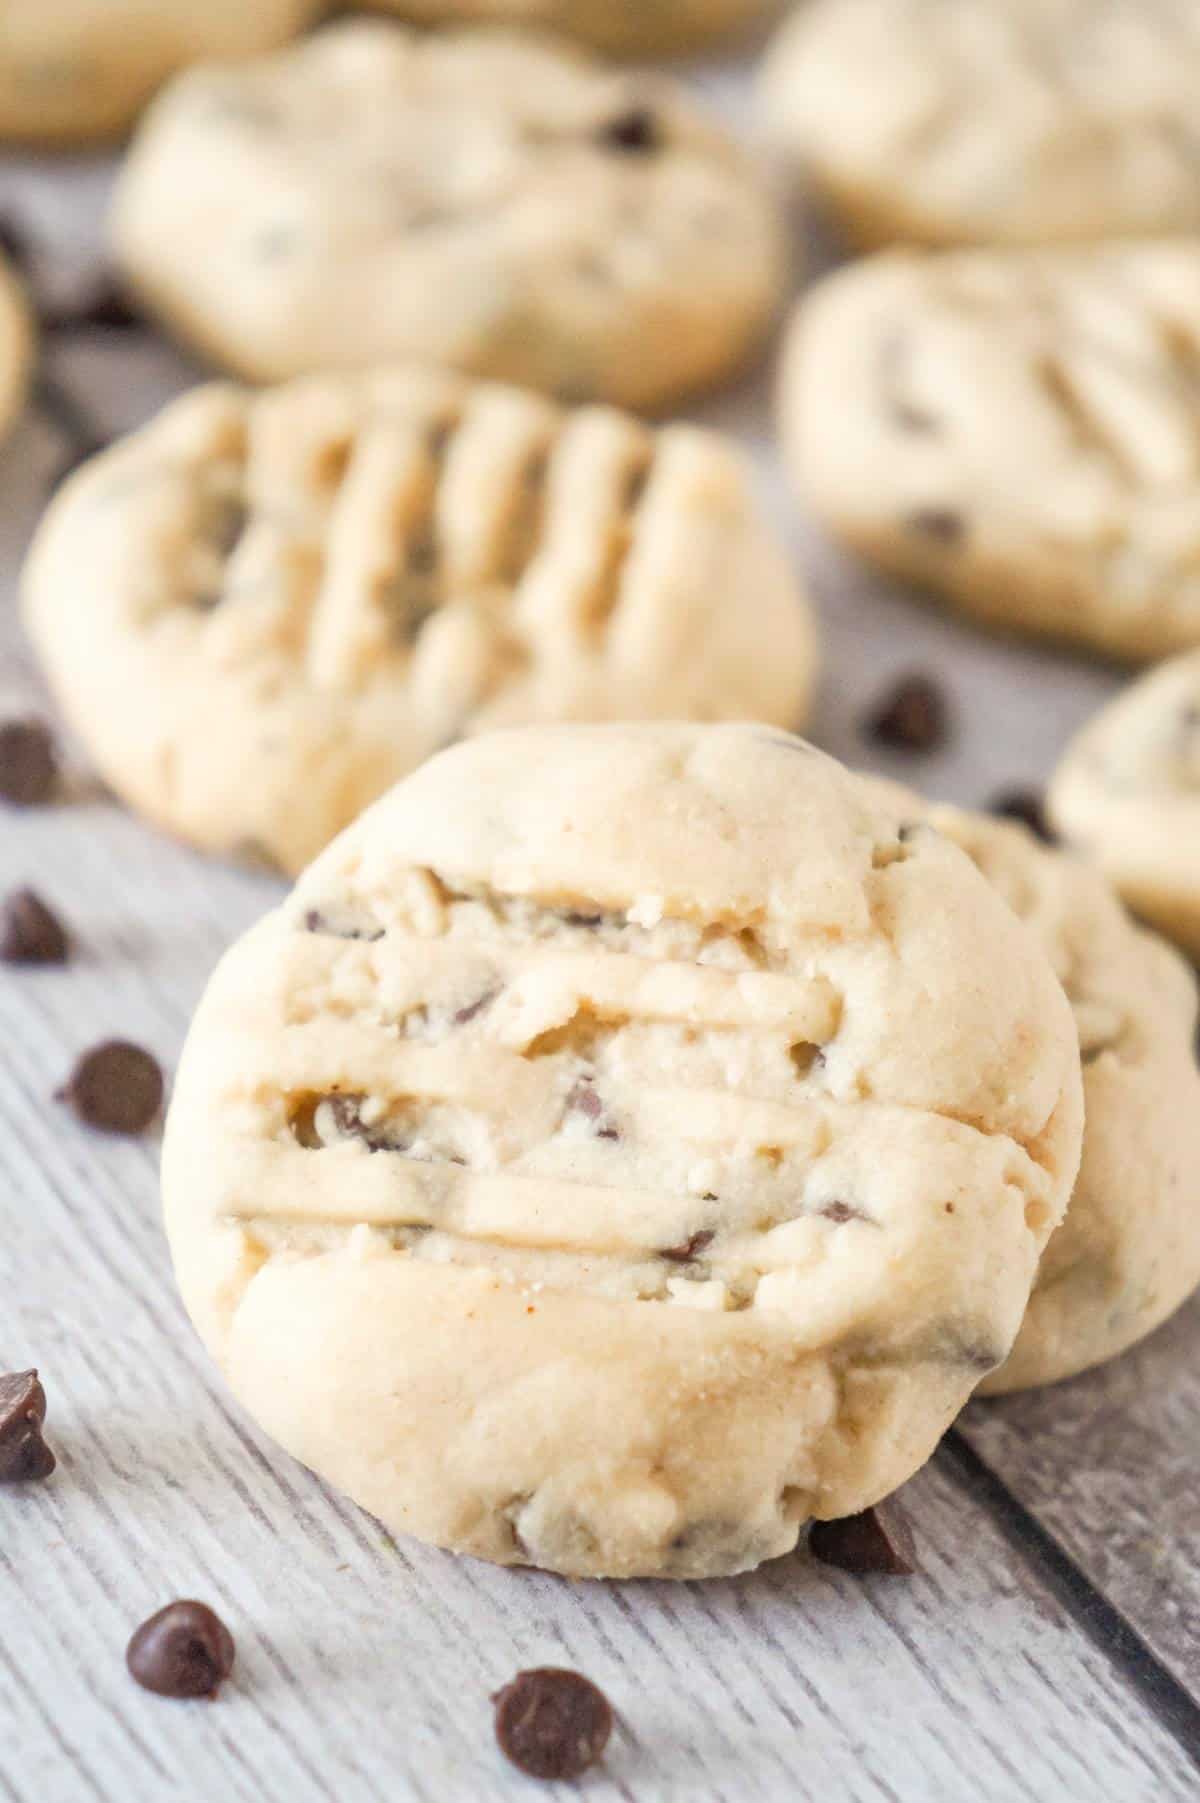 Peanut Butter Chocolate Chip Shortbread Cookies are delicious whipped shortbread cookies loaded with smooth peanut butter and mini chocolate chips.